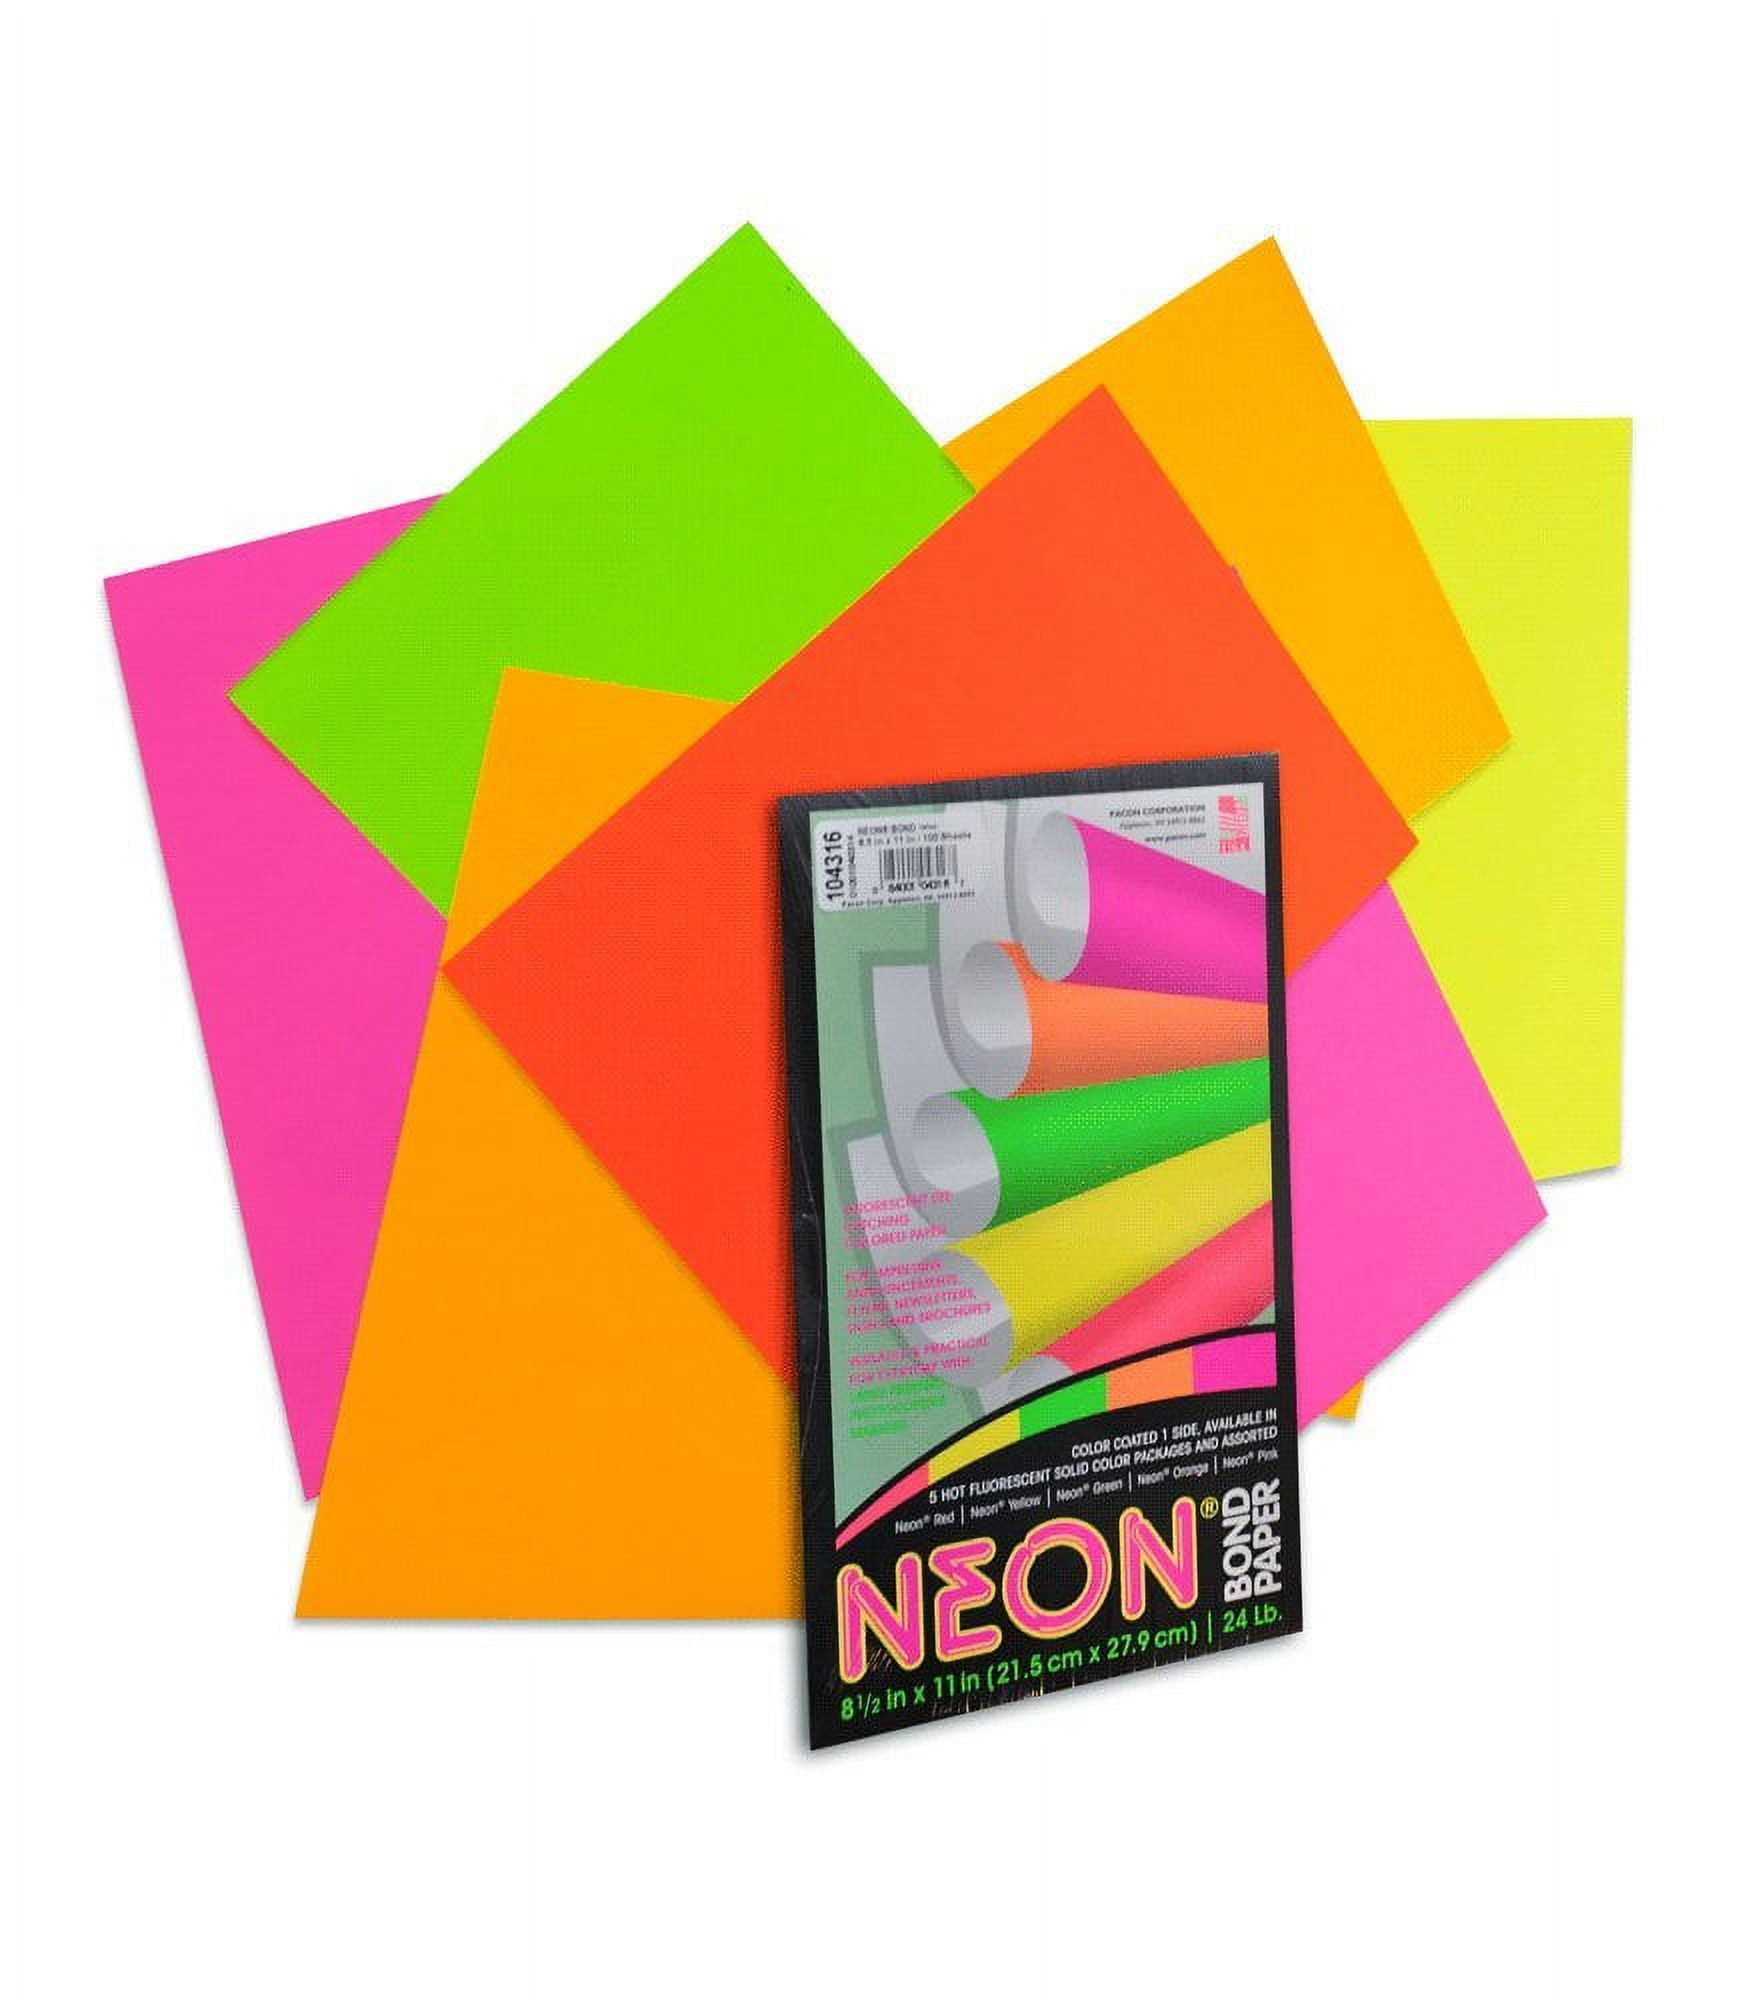 Neon Art Paper Pads, Mixed Colours - Pack of 4 - 2 x Plain and 2 x Patterned